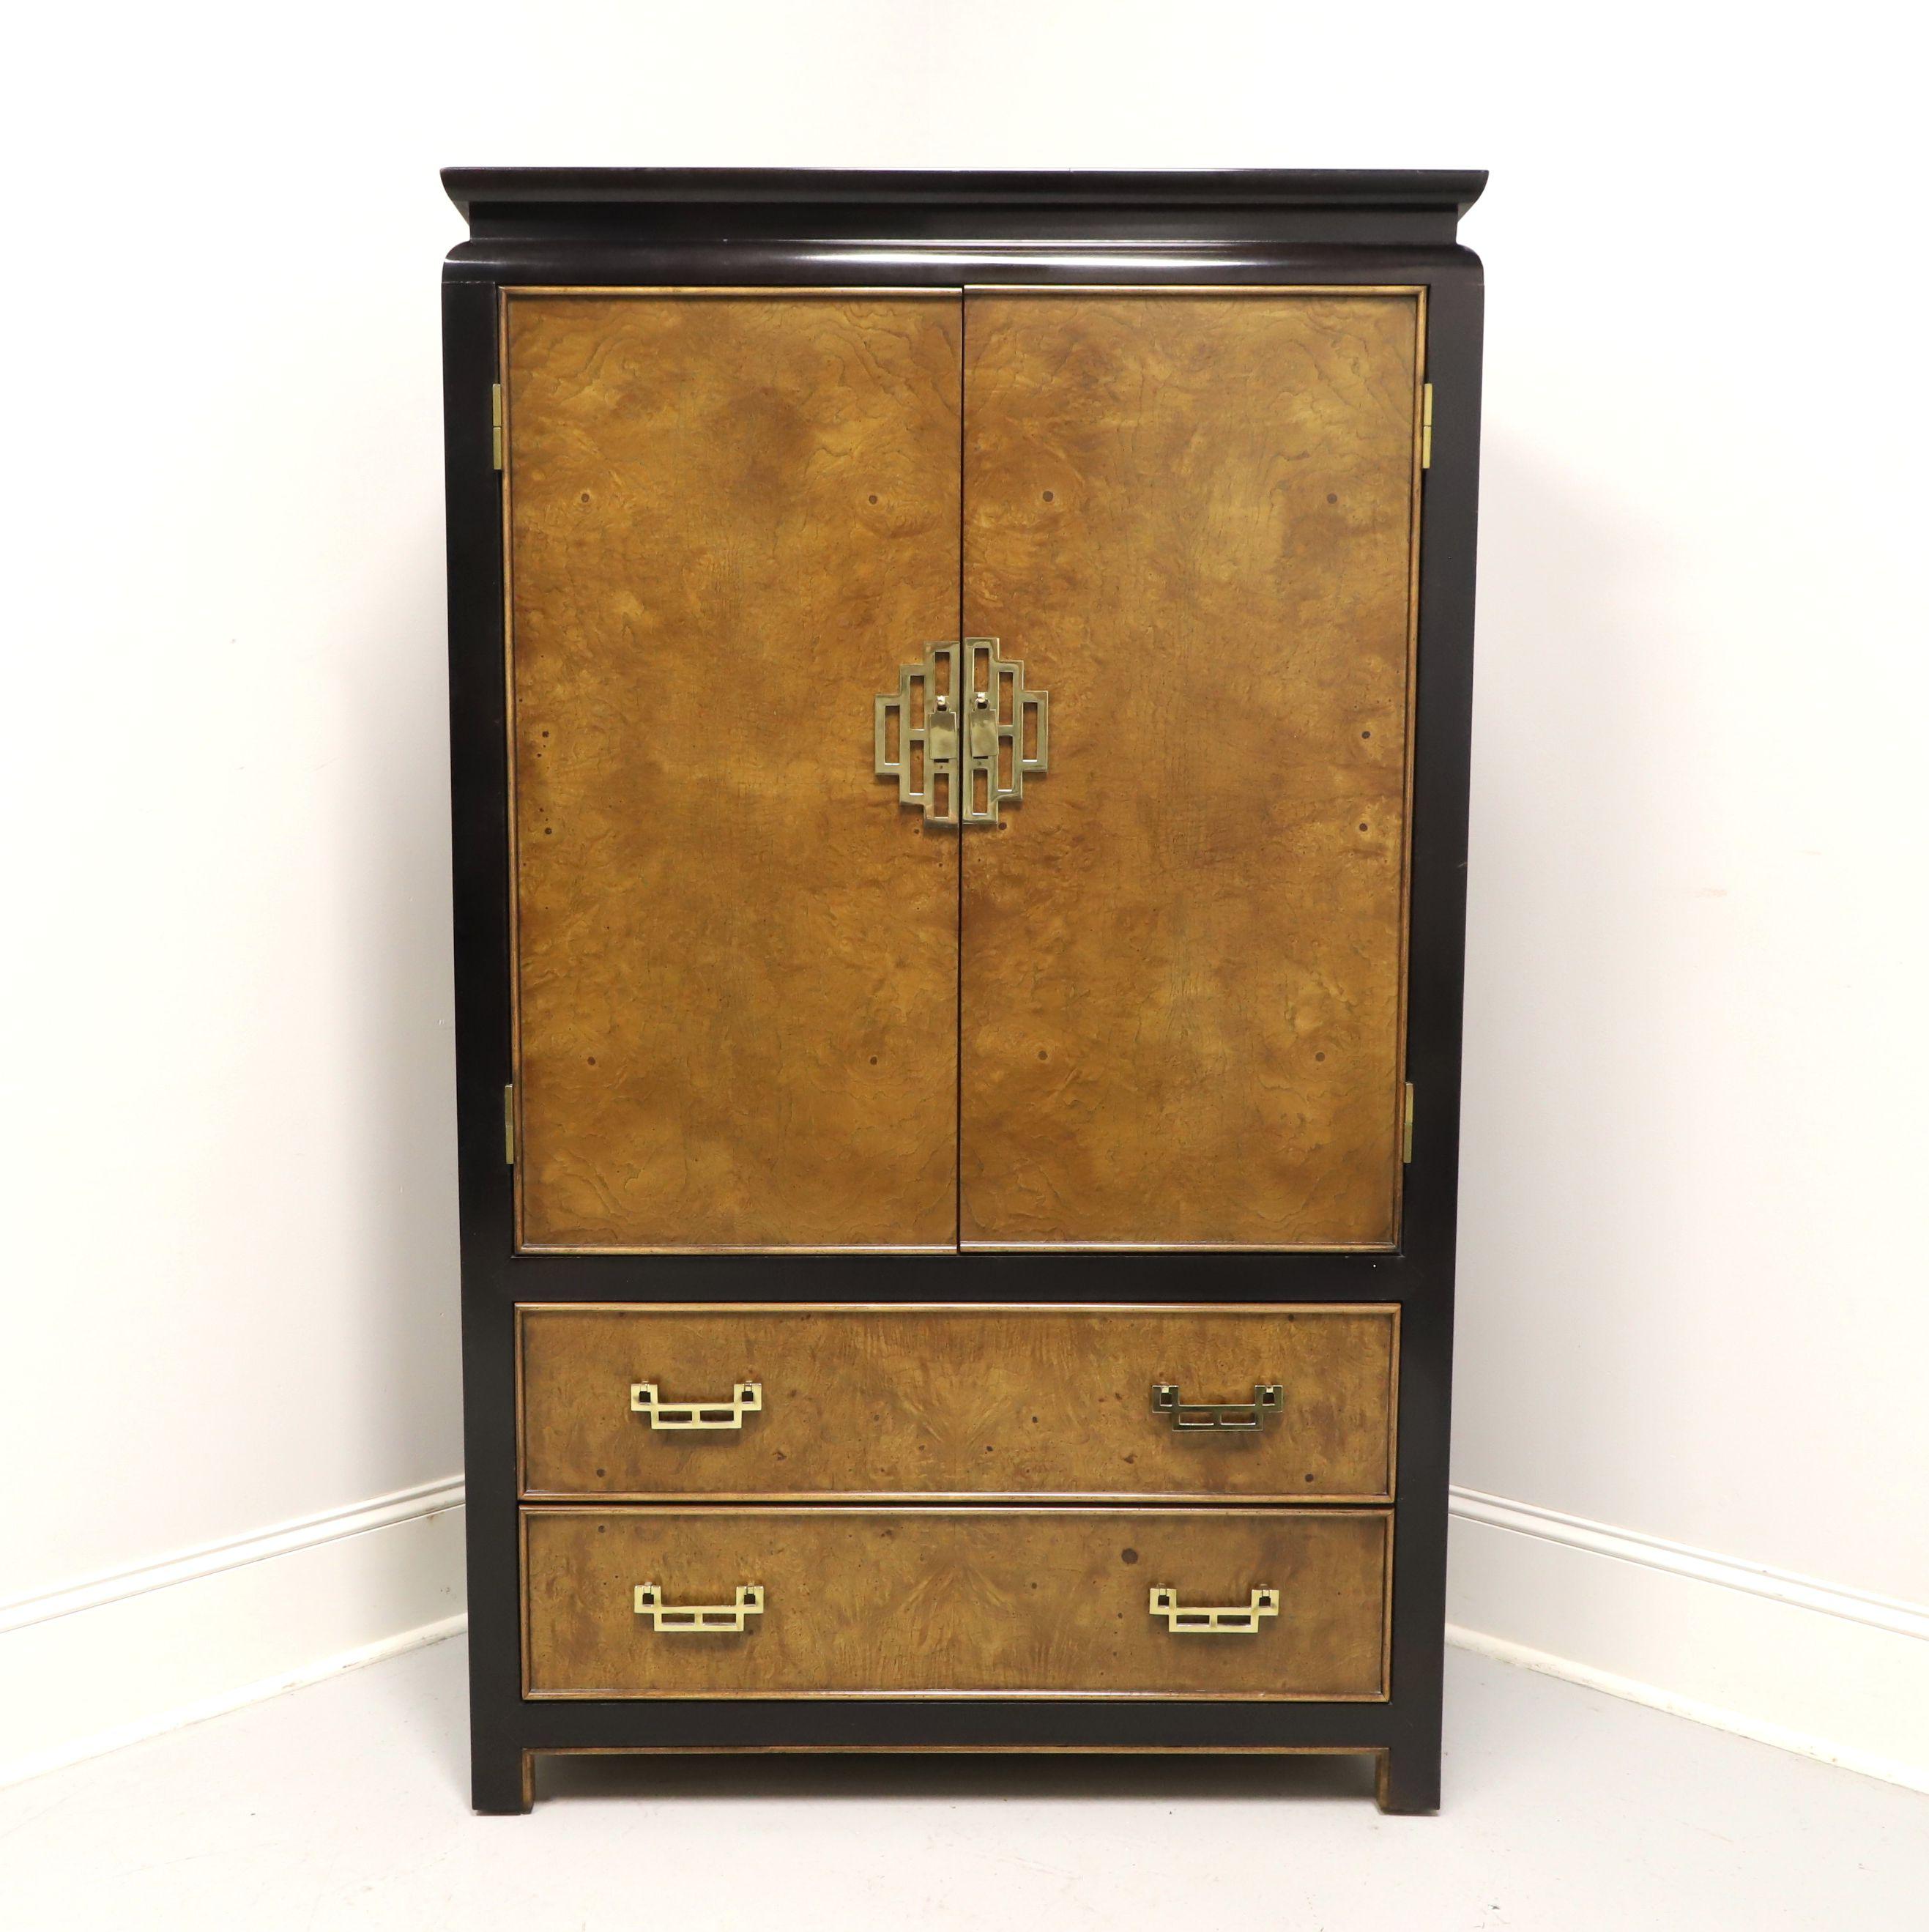 An Asian style gentleman's chest by top-quality furniture maker Century Furniture, from their 